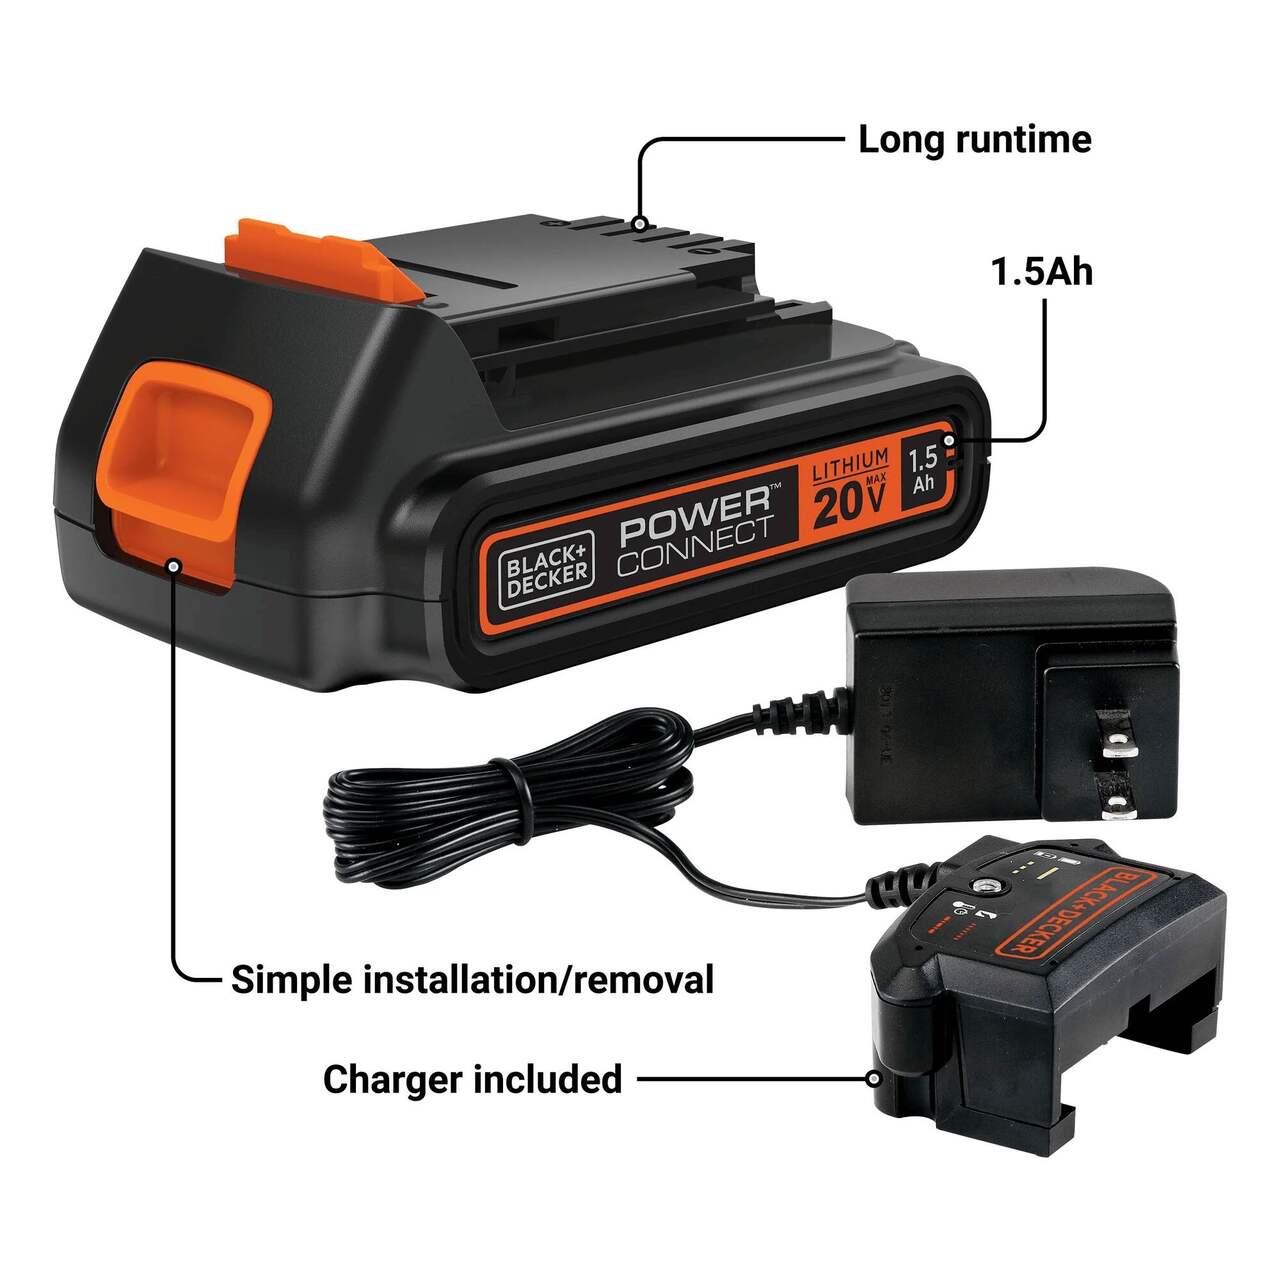 https://media-www.canadiantire.ca/product/fixing/tools/portable-power-tools/0542736/black-and-decker-20v-max-li-ion-1-5ah-battery-and-charger-07dc16a7-6f95-4e38-a87c-d877a6d67b04-jpgrendition.jpg?imdensity=1&imwidth=1244&impolicy=mZoom